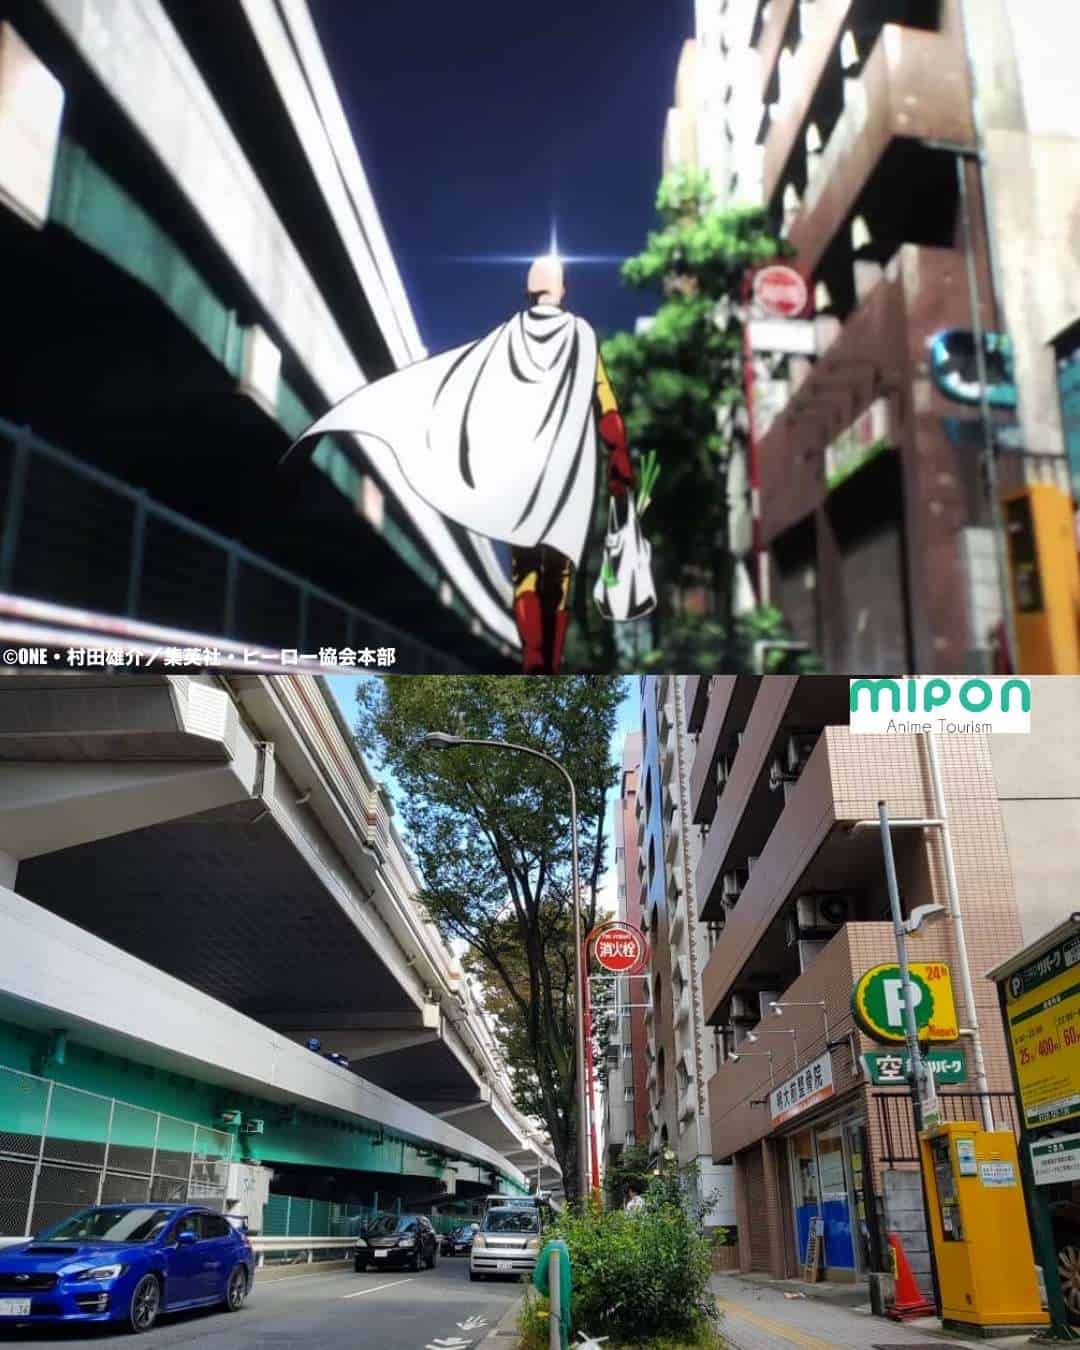 The 15 Most Beautiful Anime Places and Locations in Real Life - whatNerd